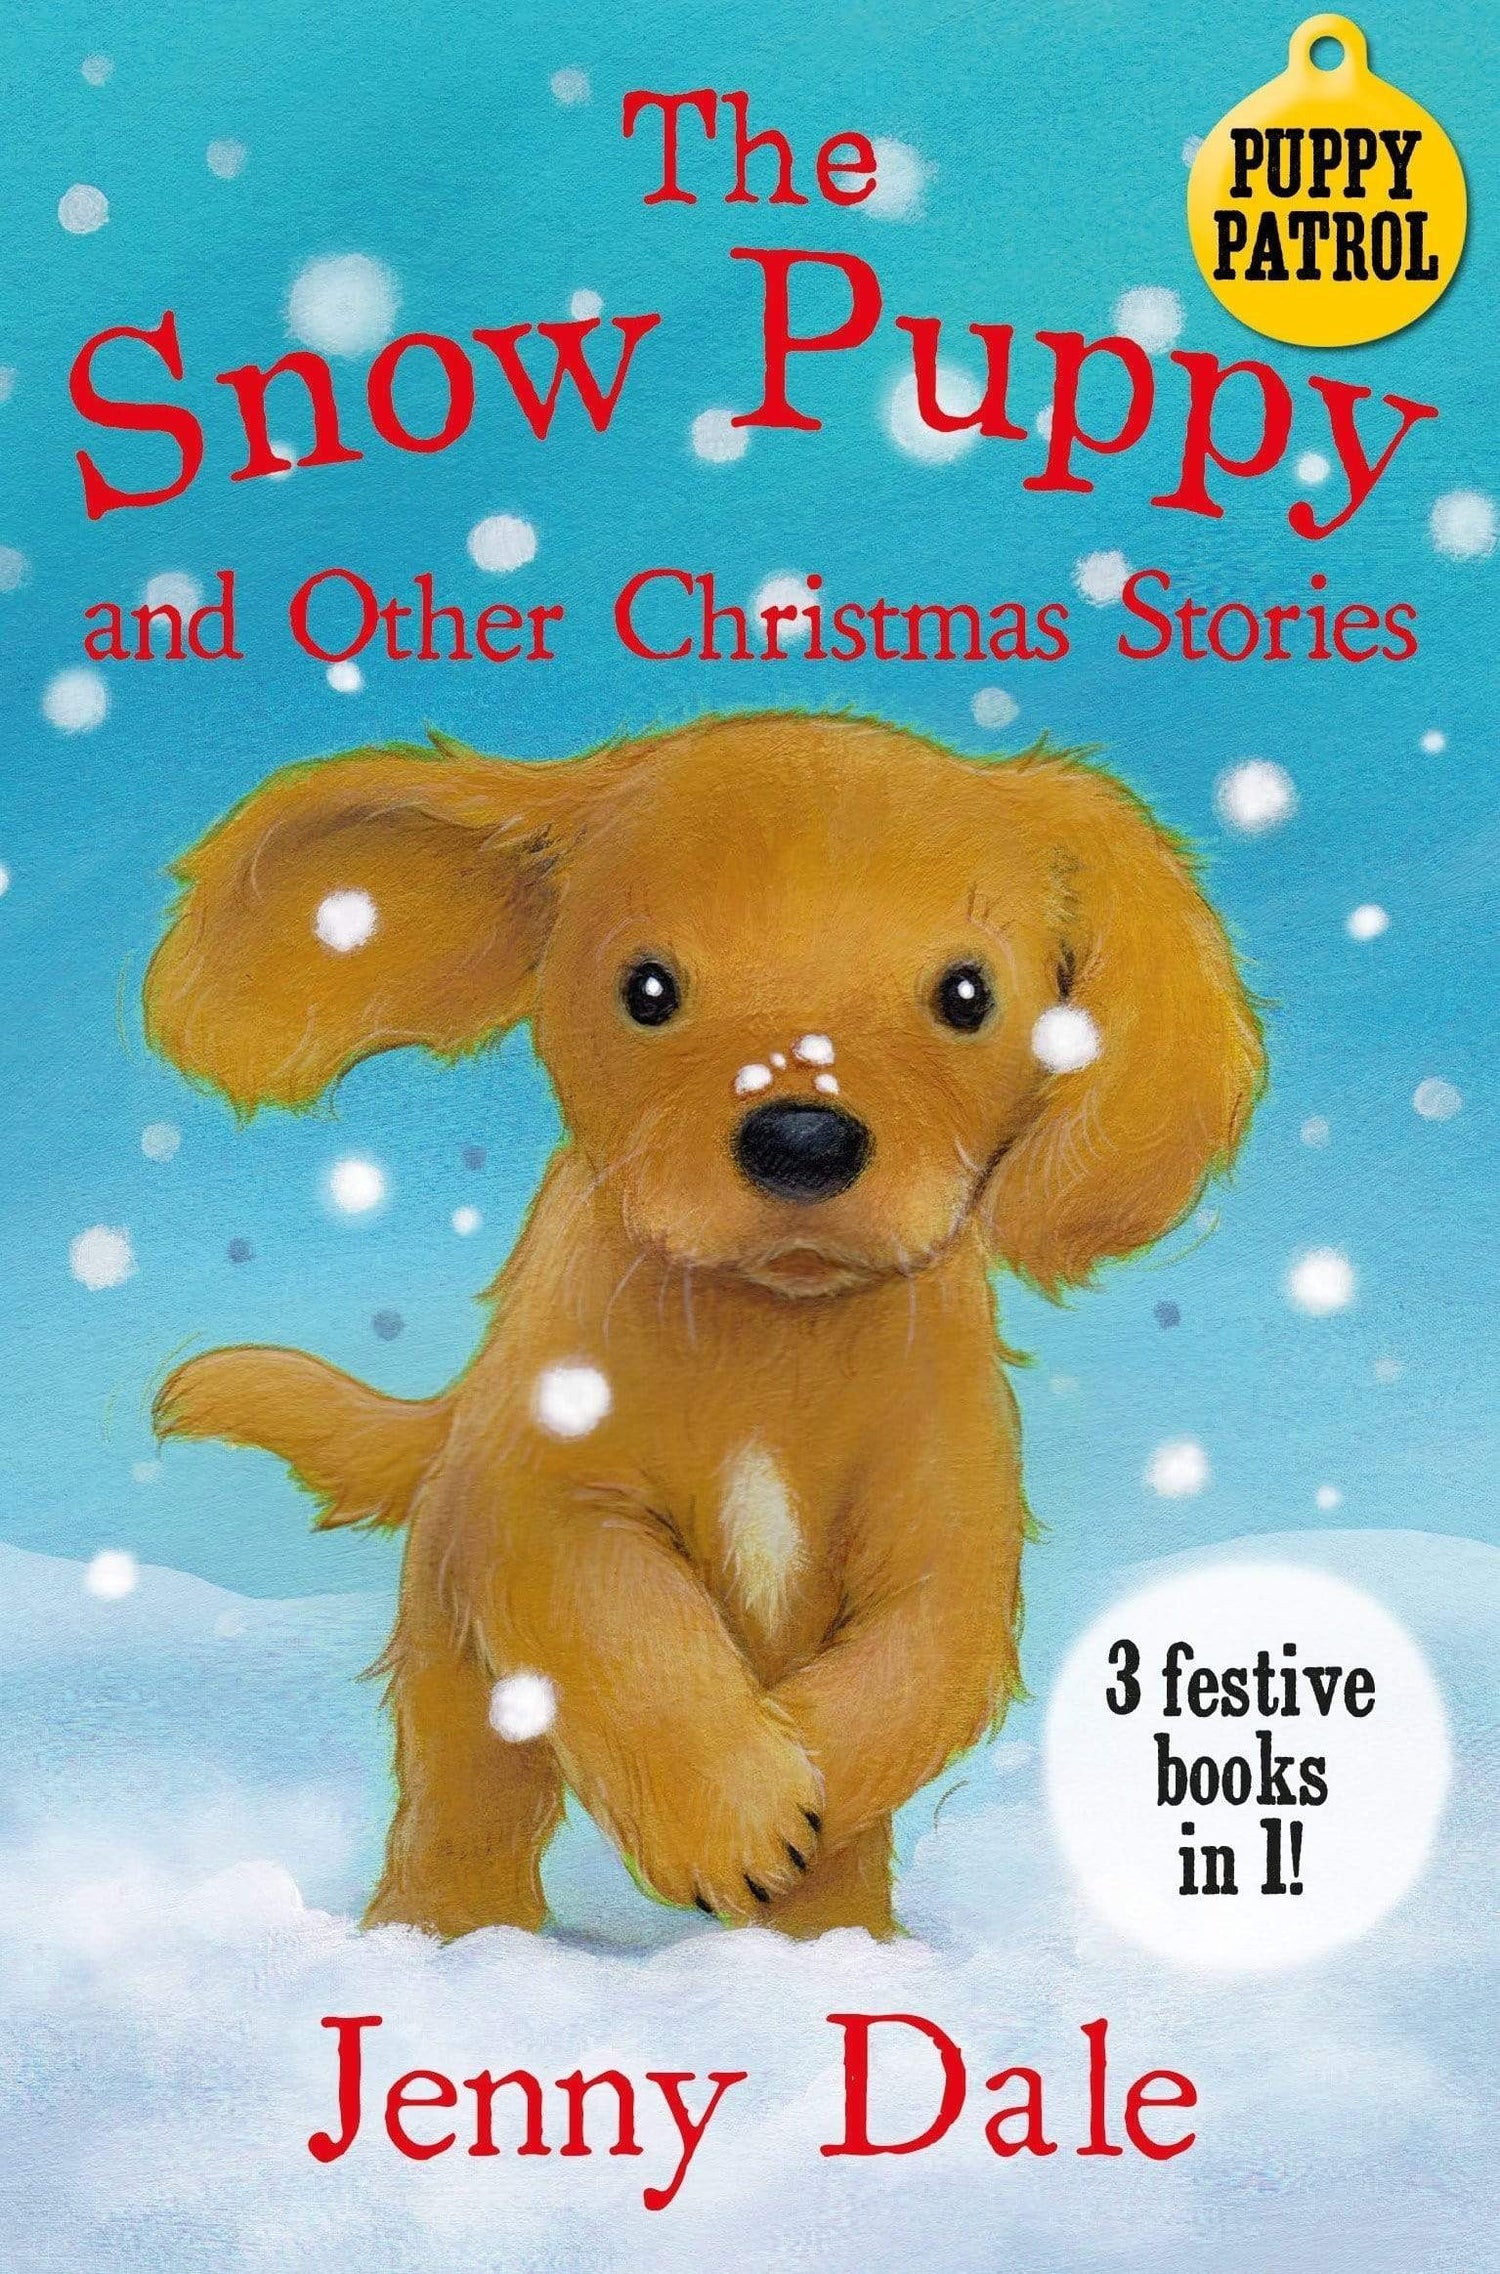 THE SNOW PUPPY AND OTHER CHRISTMAS STORIES